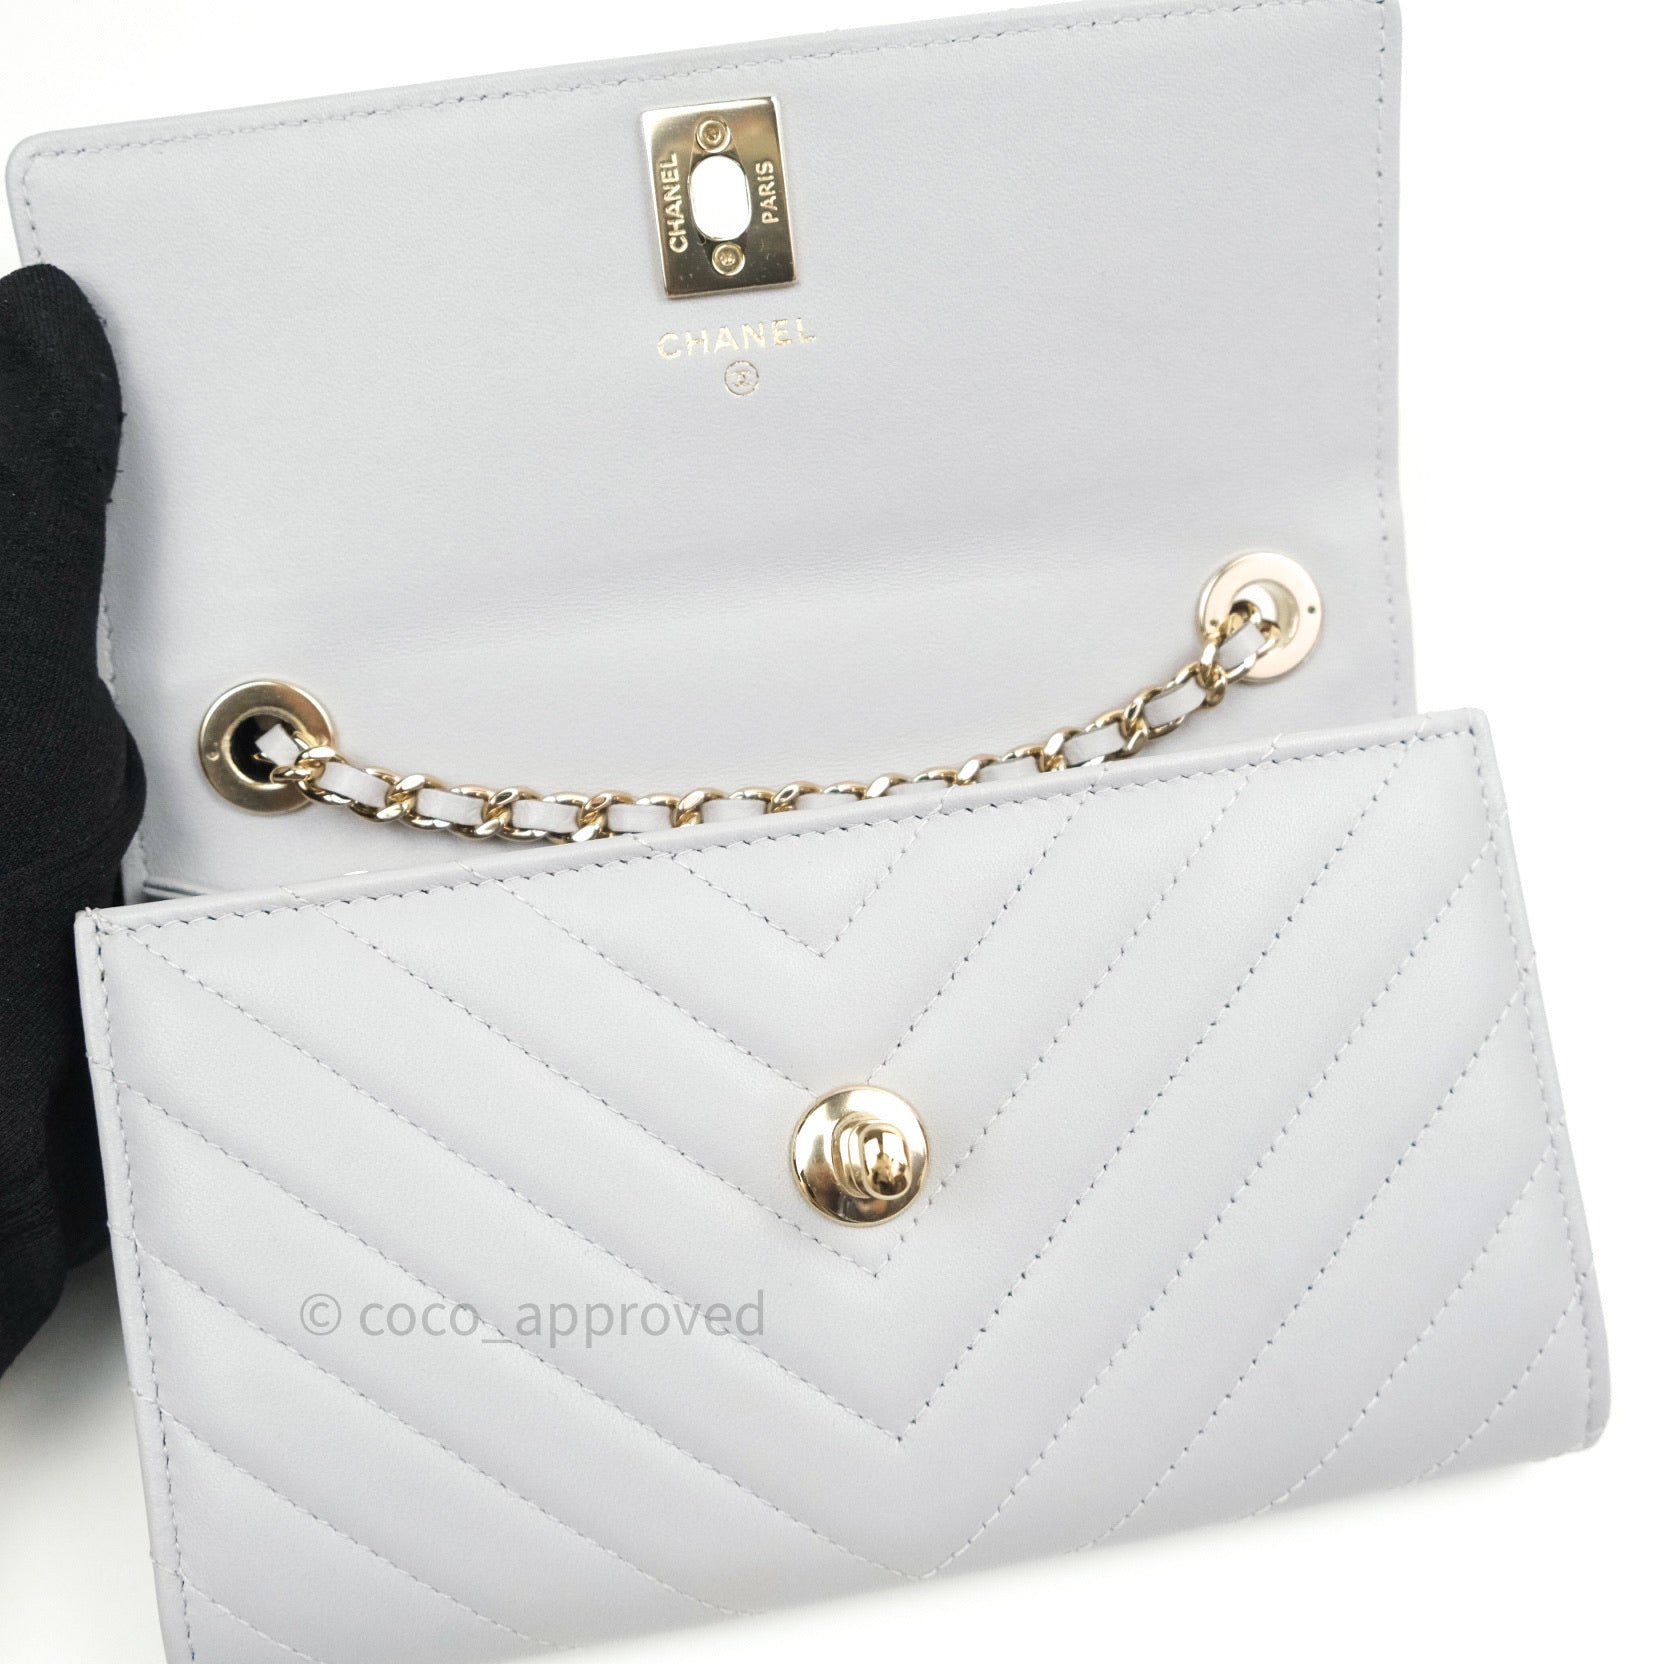 CHANEL Mini Wallet on Chain Lambskin & Gold-Tone Metal. White -  AP1820B0436910601 - Small leather goods